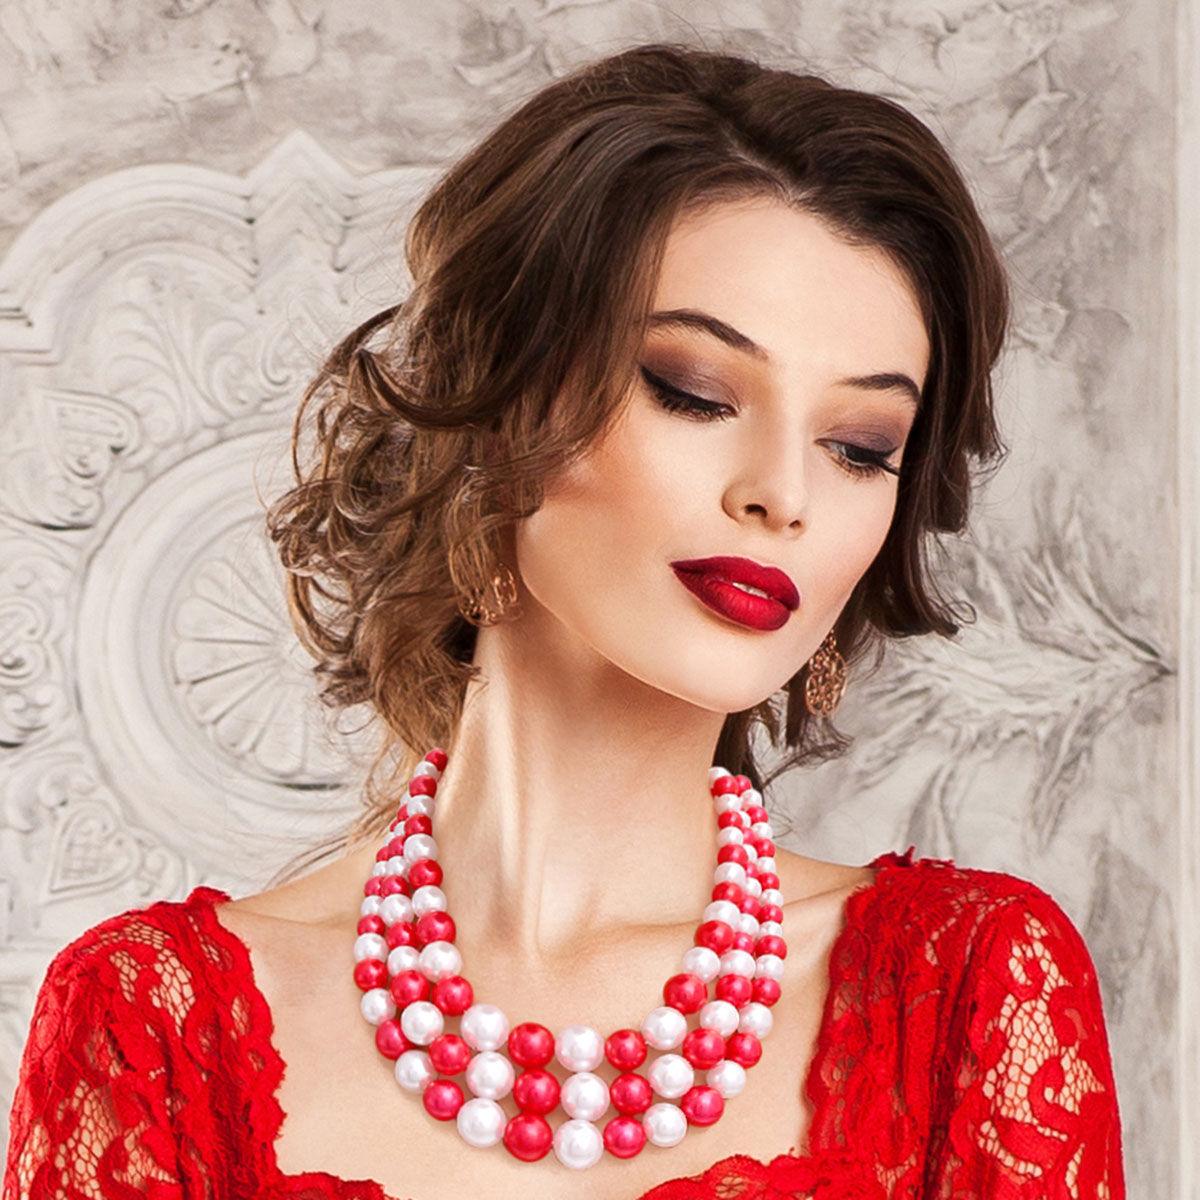 Layered Pearl Necklace with Earrings in Red, White, Silver